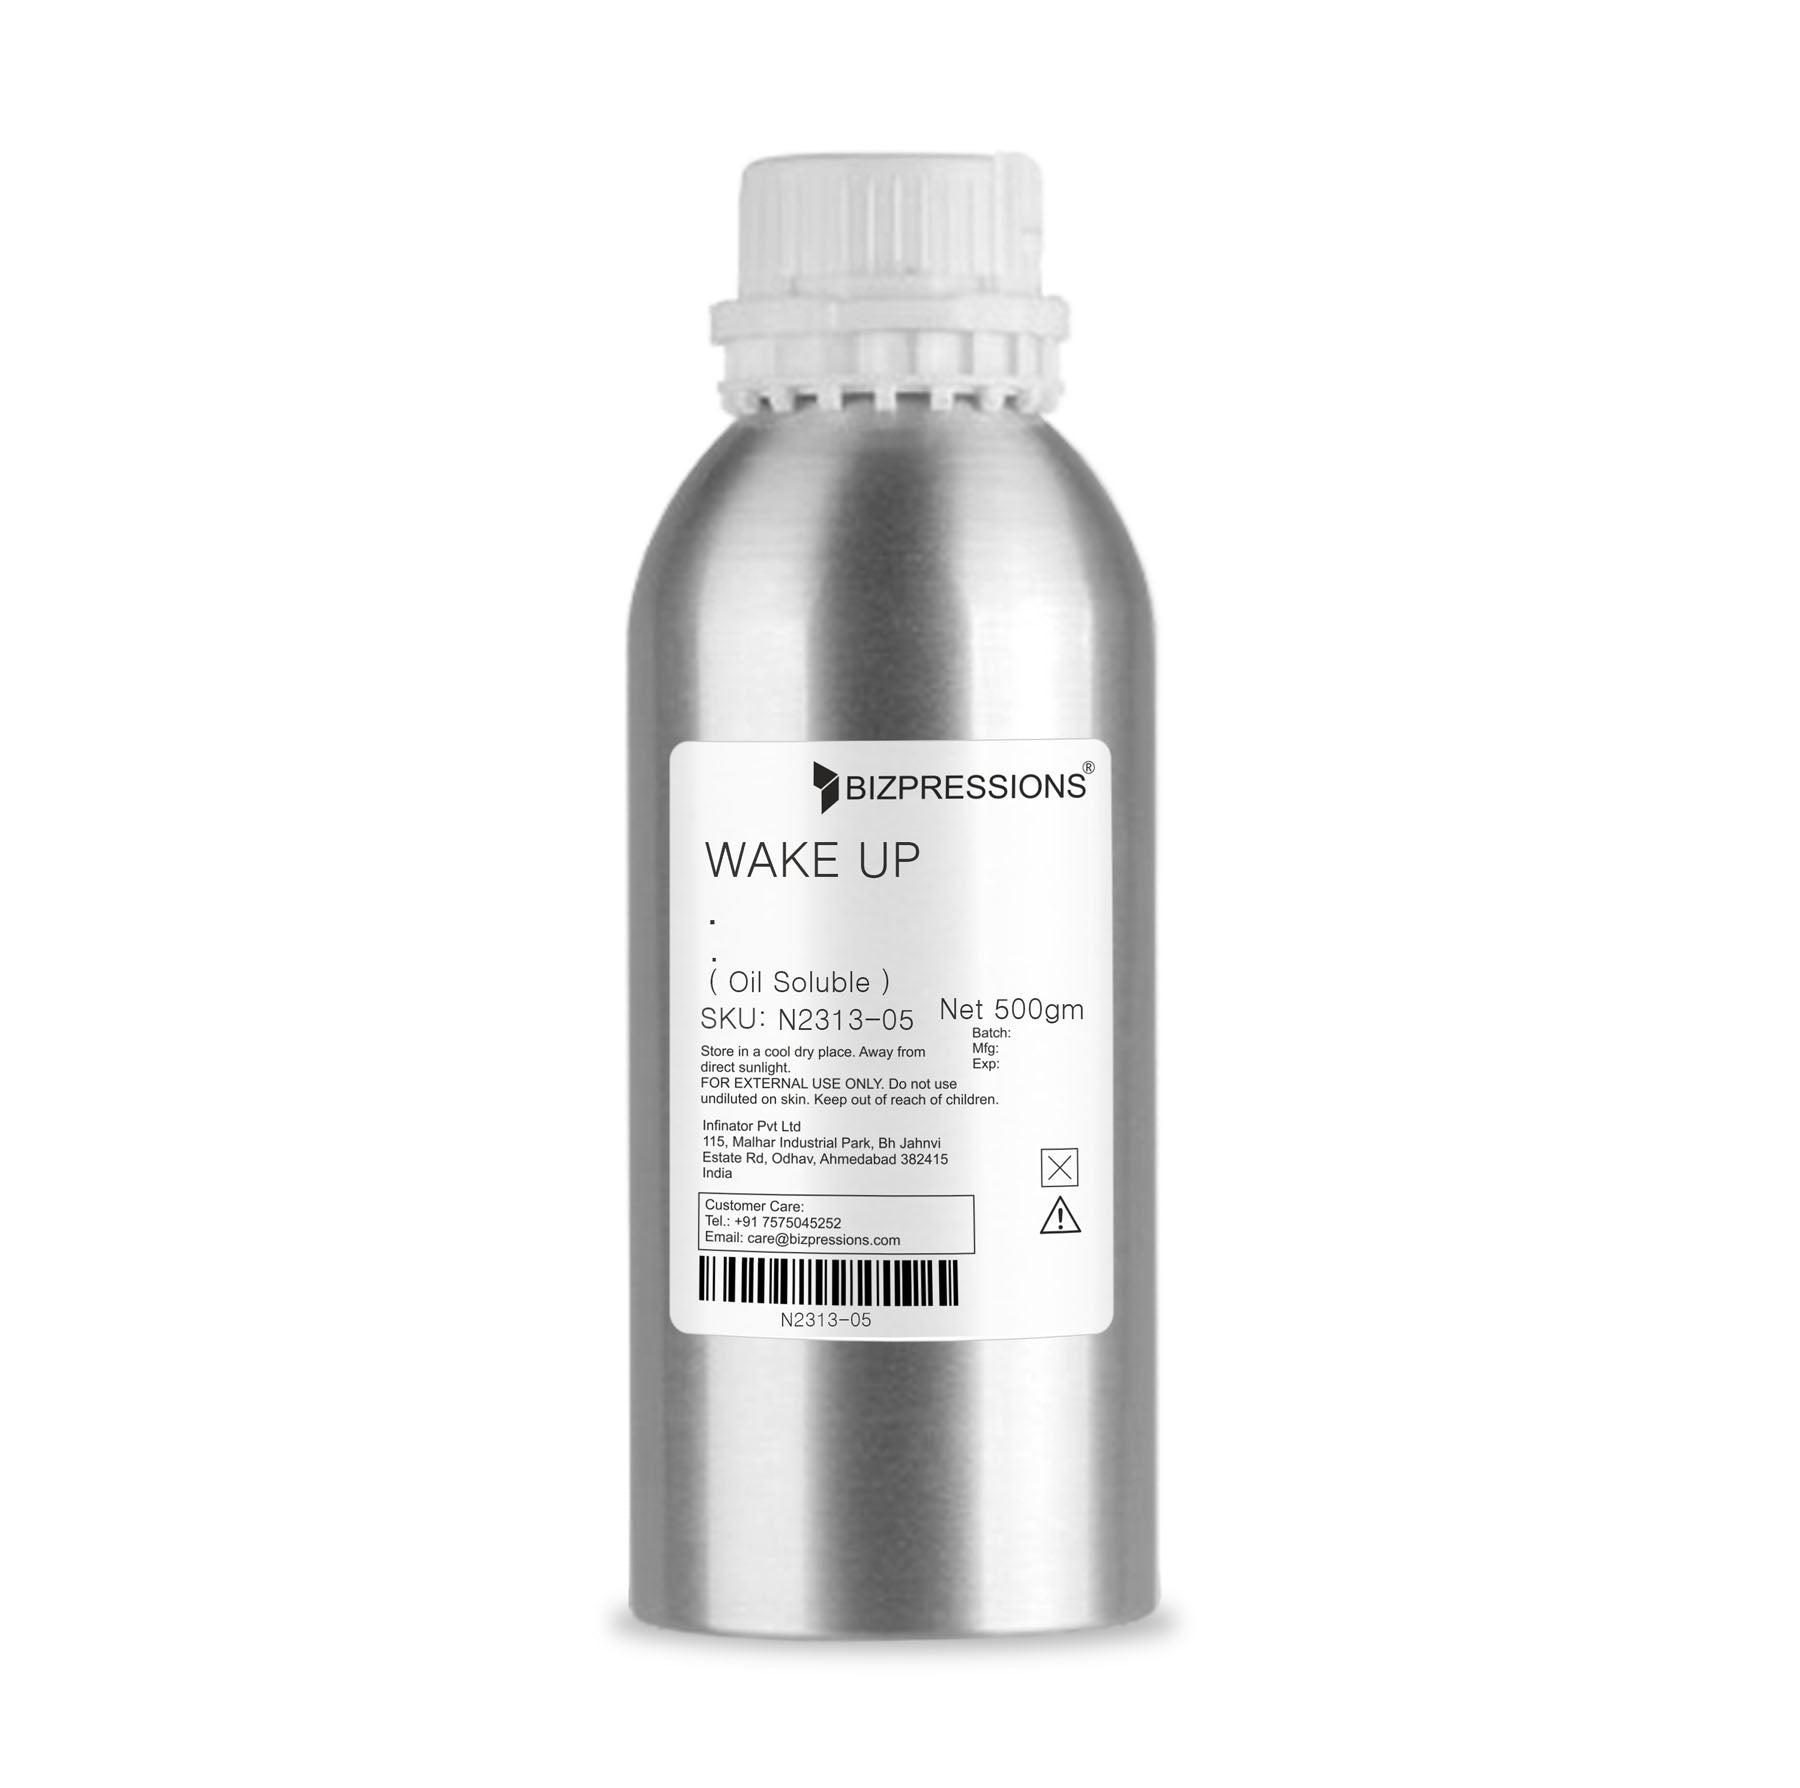 WAKE UP - Fragrance ( Oil Soluble ) - 500 gm